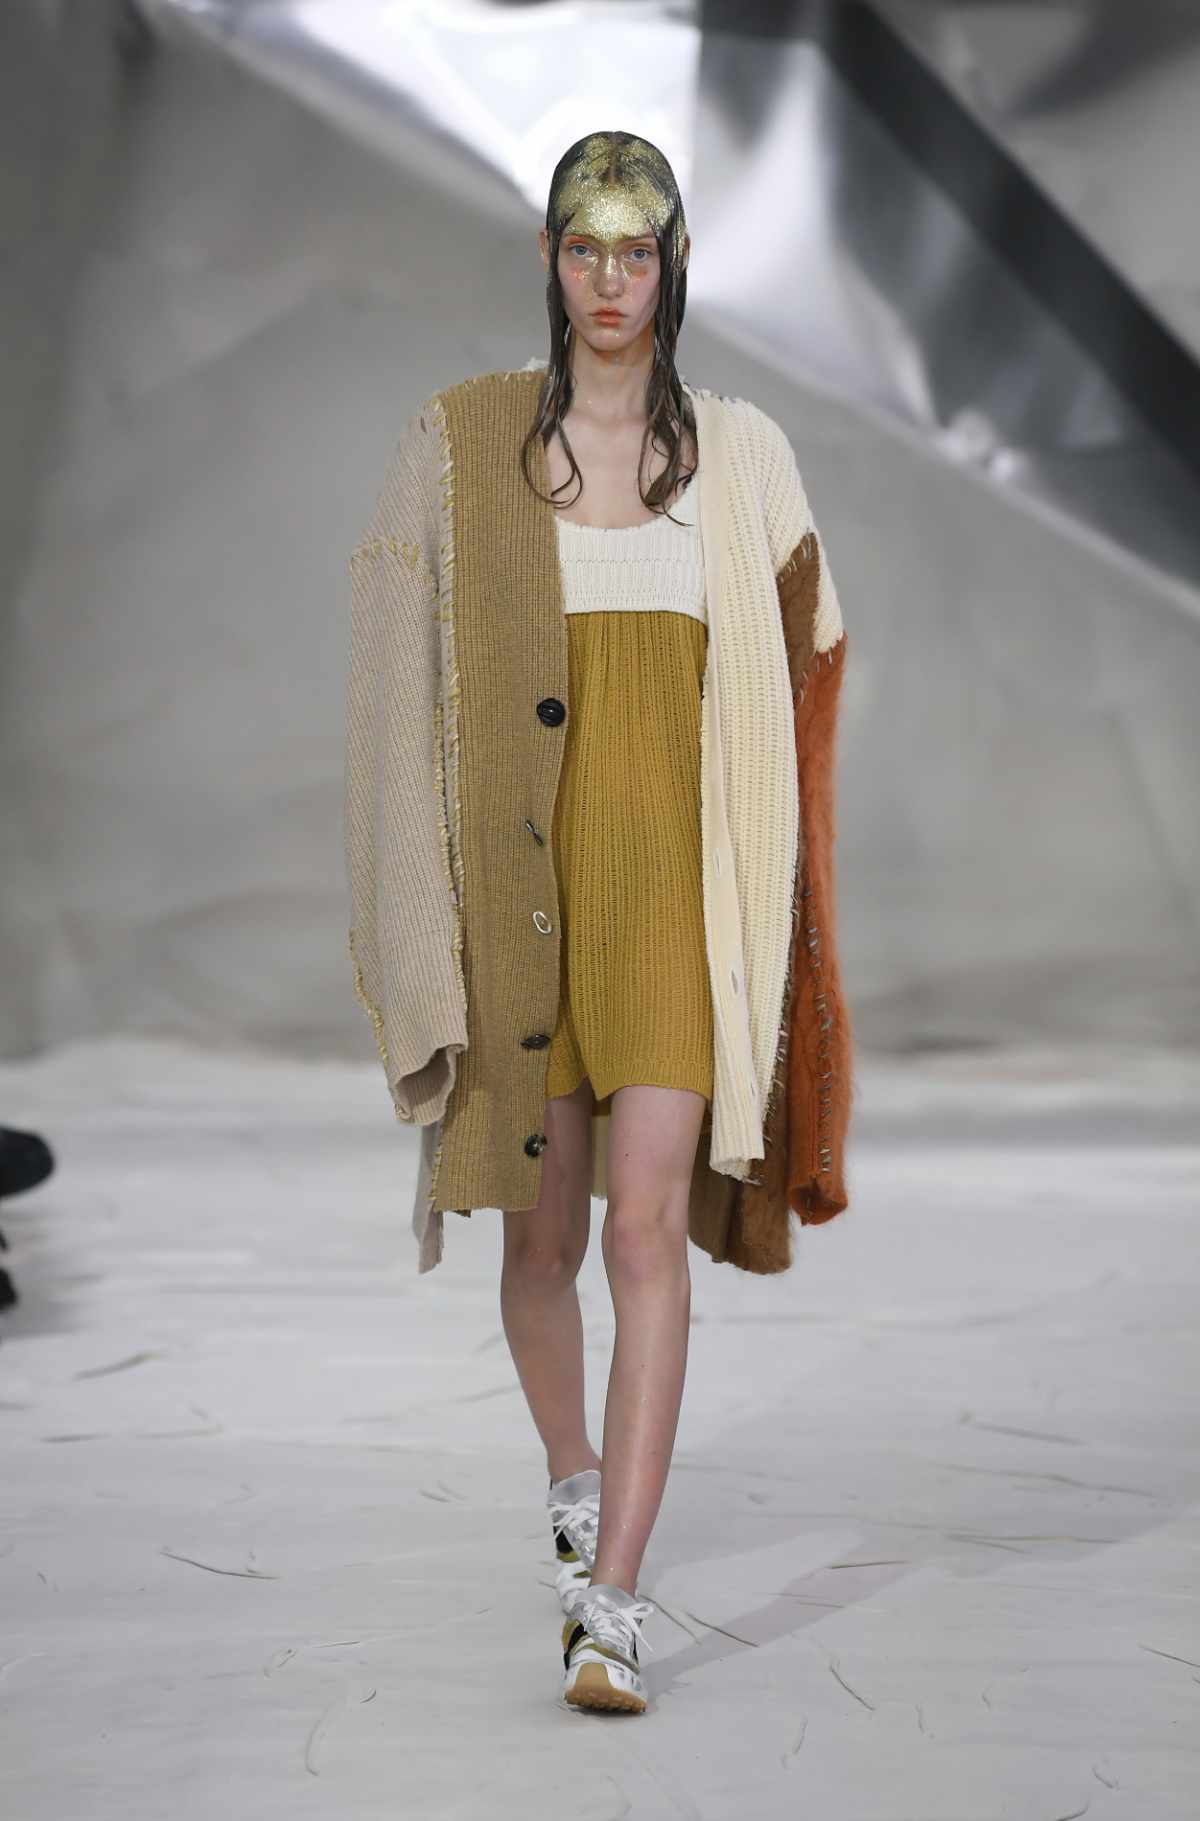 Marni: Women's FW20 Collection